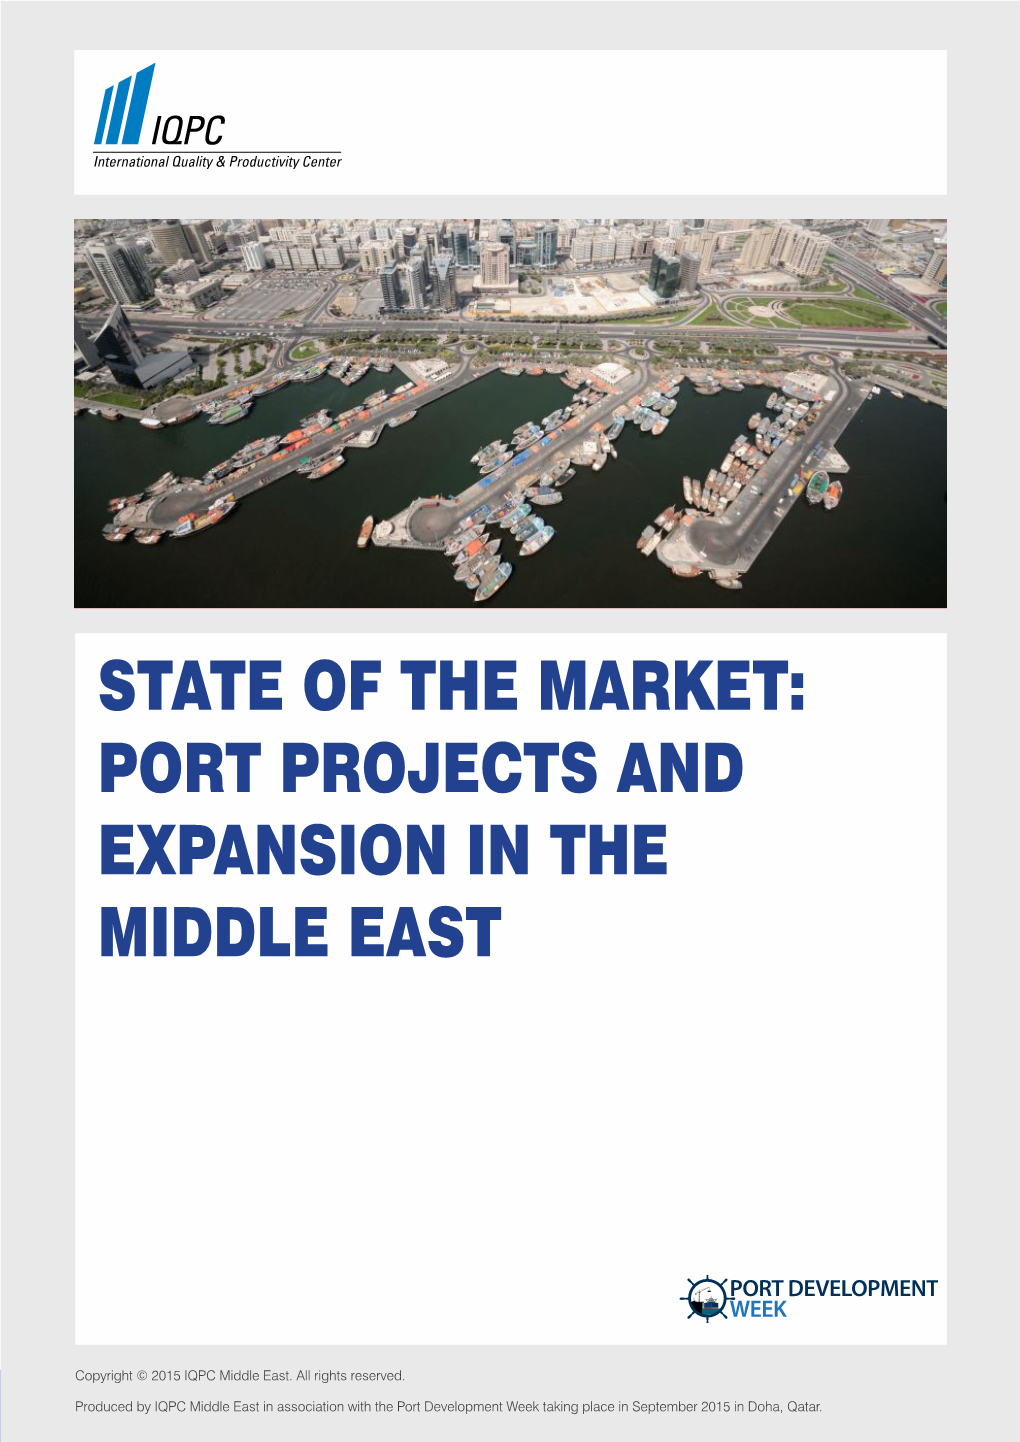 Port Projects and Expansion in the Middle East